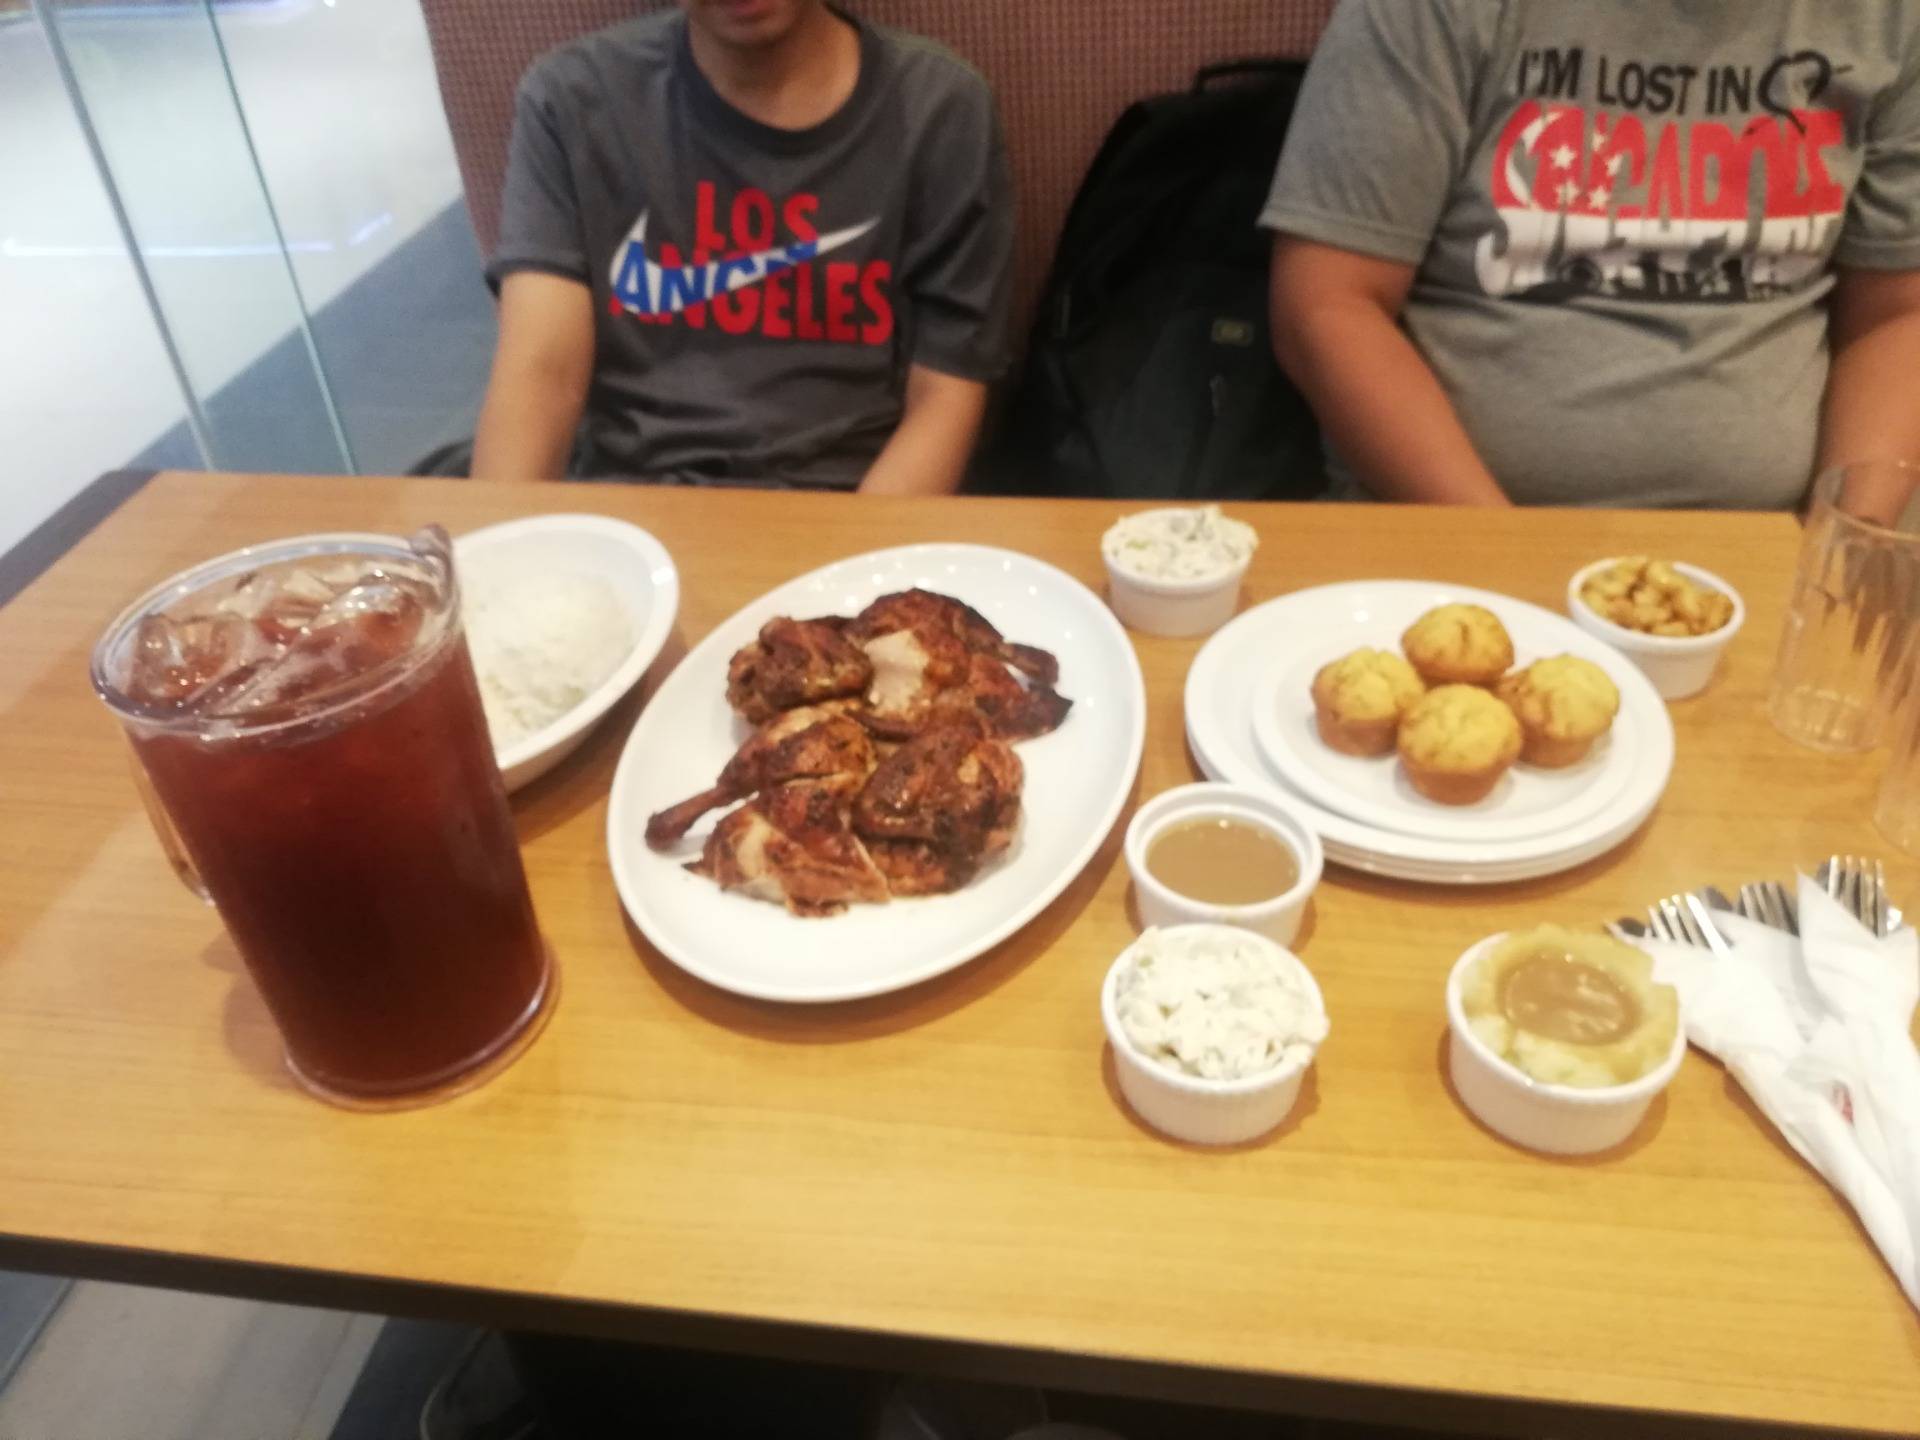 Fried chicken with rice platter, muffins, side dishes, gravy and 1 pitcher of iced tea